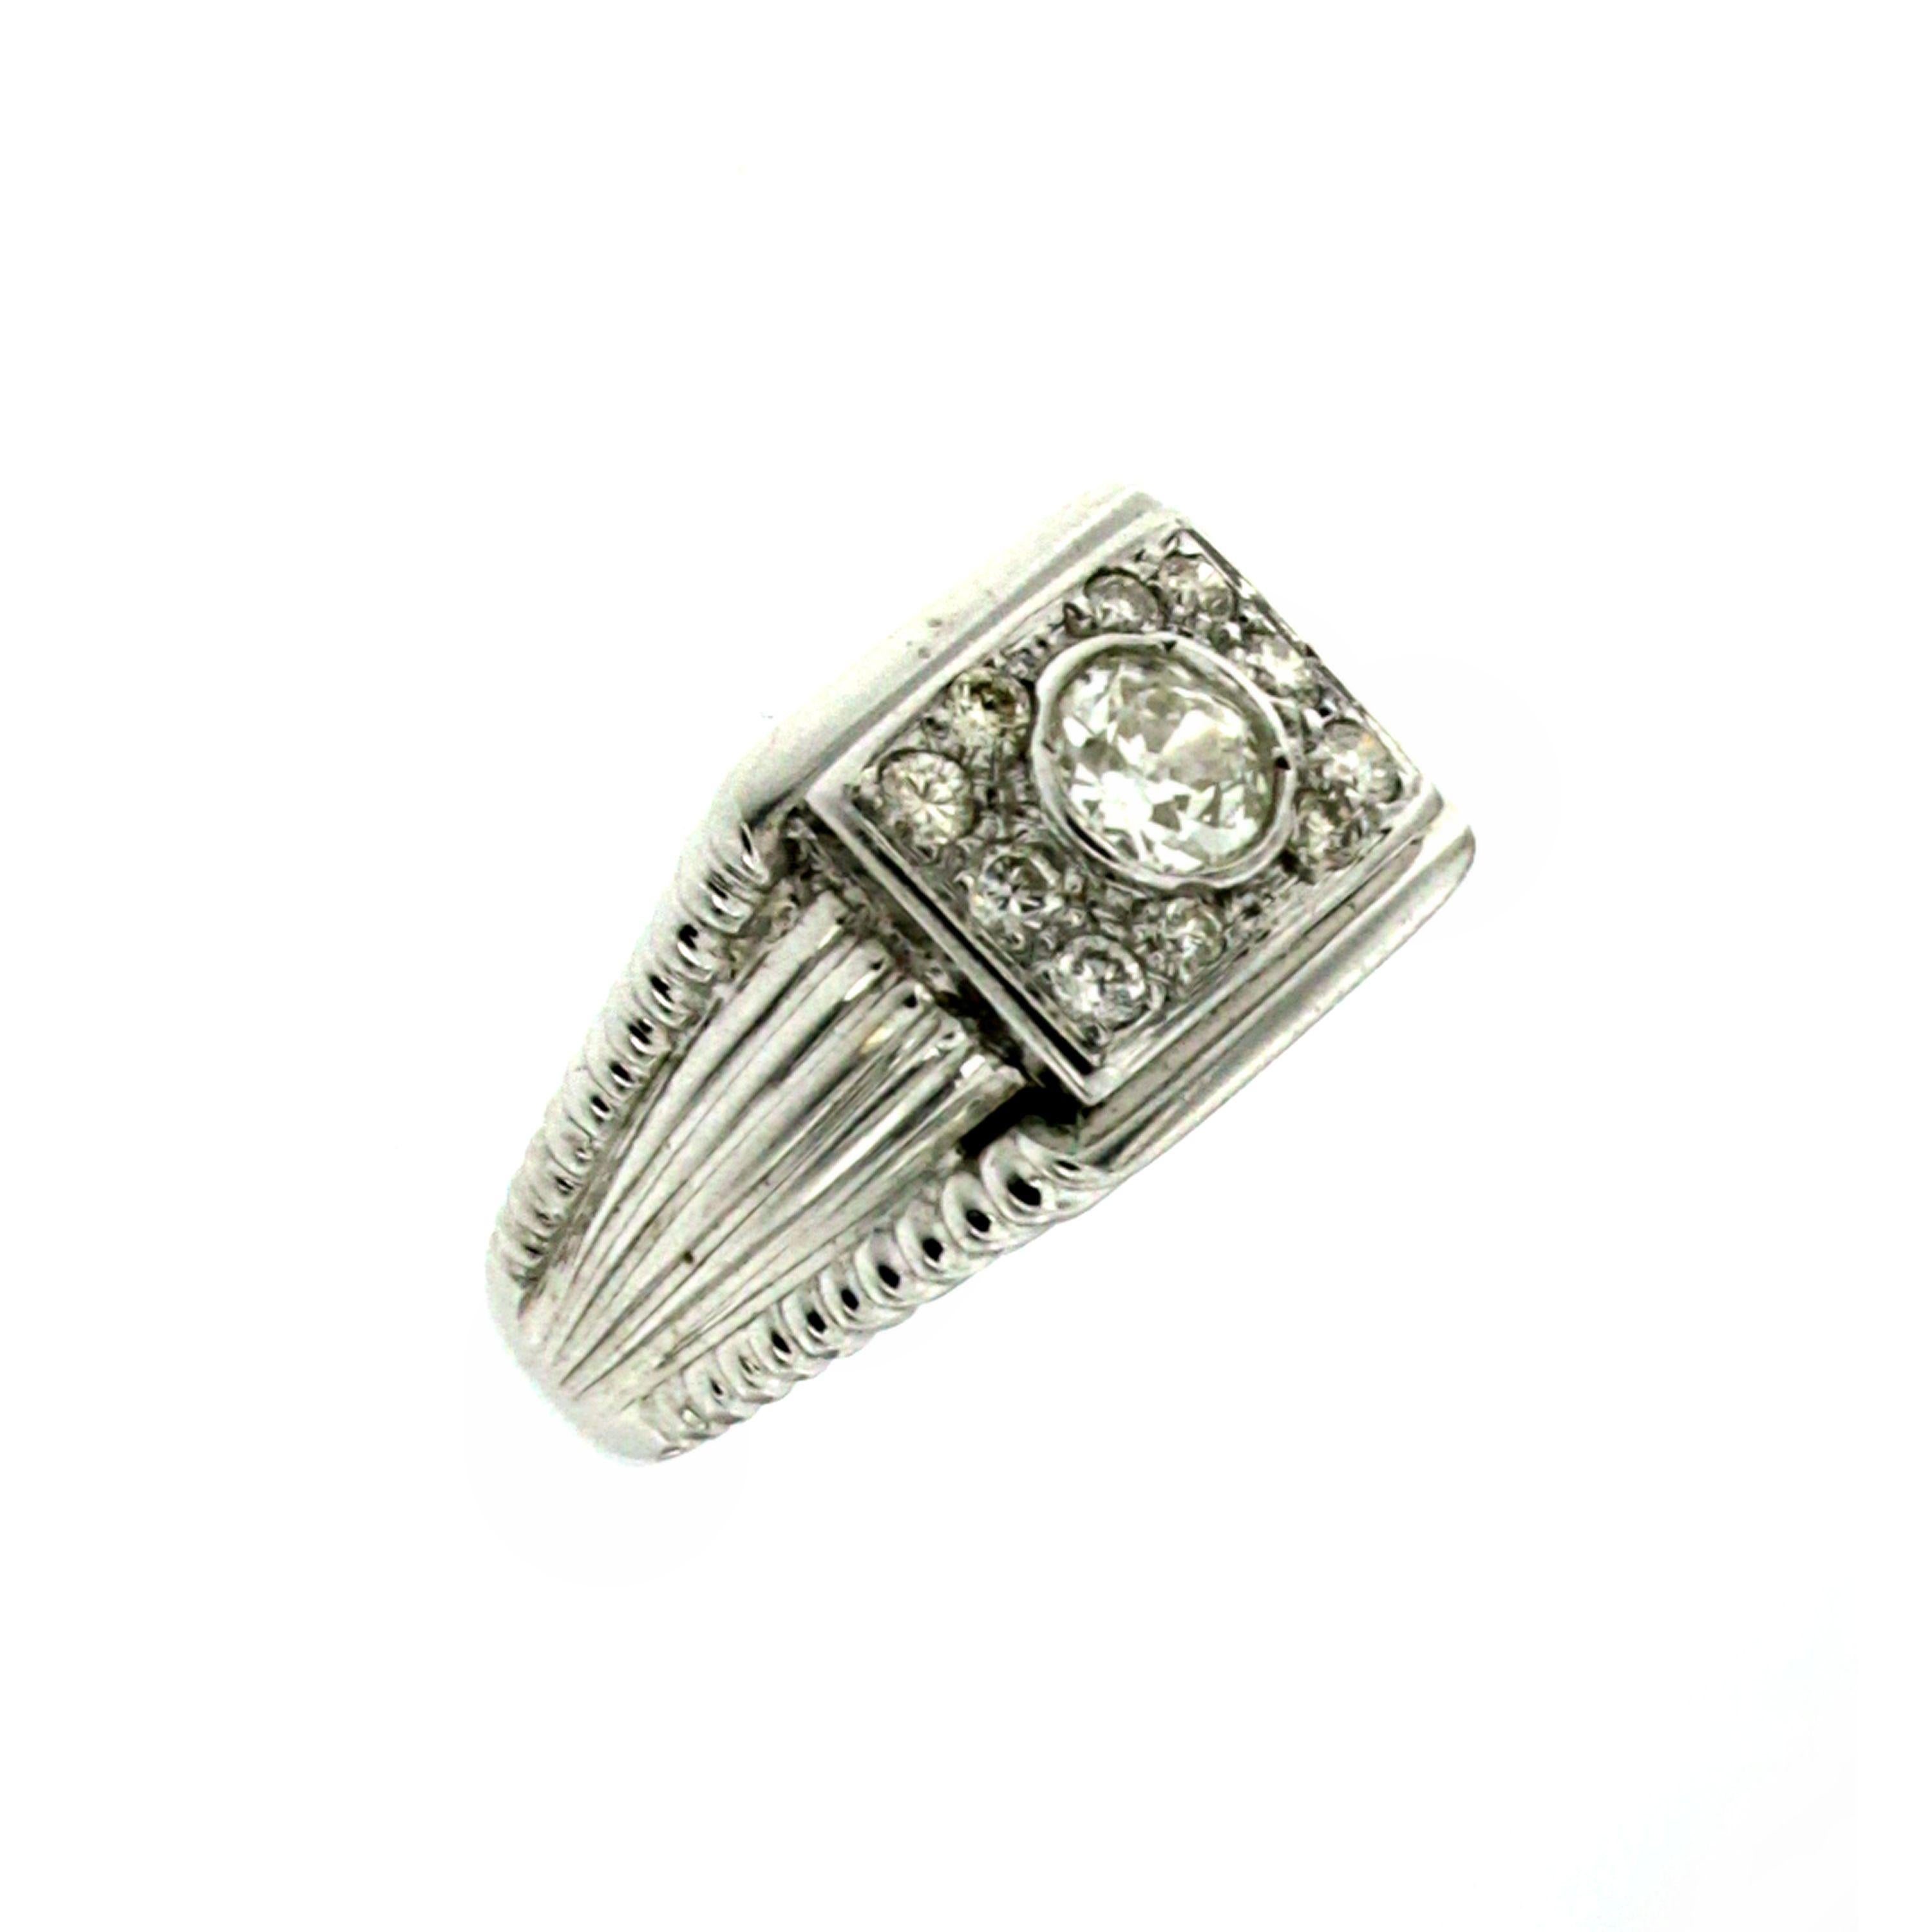 A Beautiful Retro band ring hand made in 18k White Gold and set with 1 large European Cut Diamond in the center, weighs 0,60 ct graded H/I color Vs clarity, surrounded by 0,50 carat of diamonds pave setting graded G/H color.
The setting featuring a